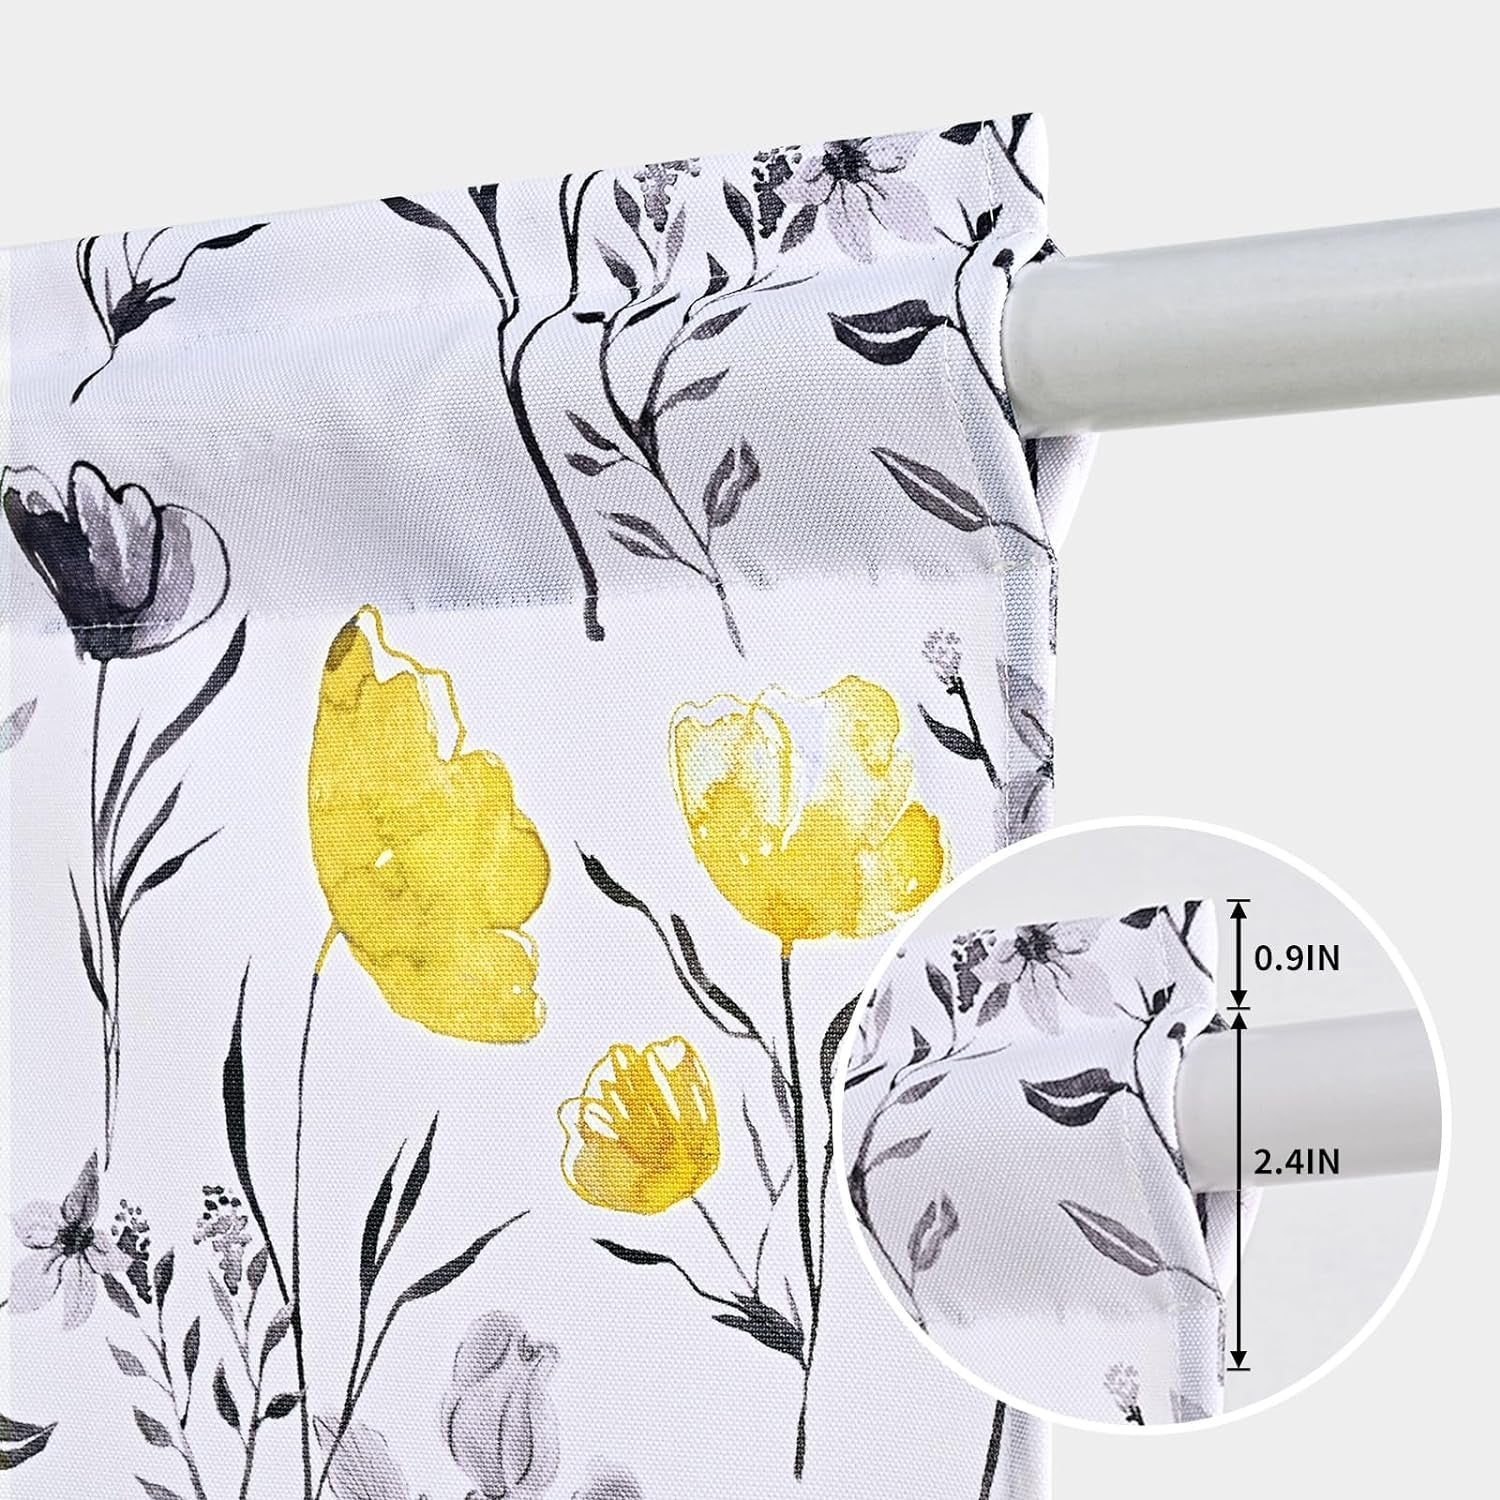 Likiyol Floral Kithchen Curtains 36 Inch Watercolor Flower Leaves Tier Curtains, Yellow and Gray Floral Cafe Curtains, Rod Pocket Small Window Curtain for Cafe Bathroom Bedroom Drapes  Likiyol   